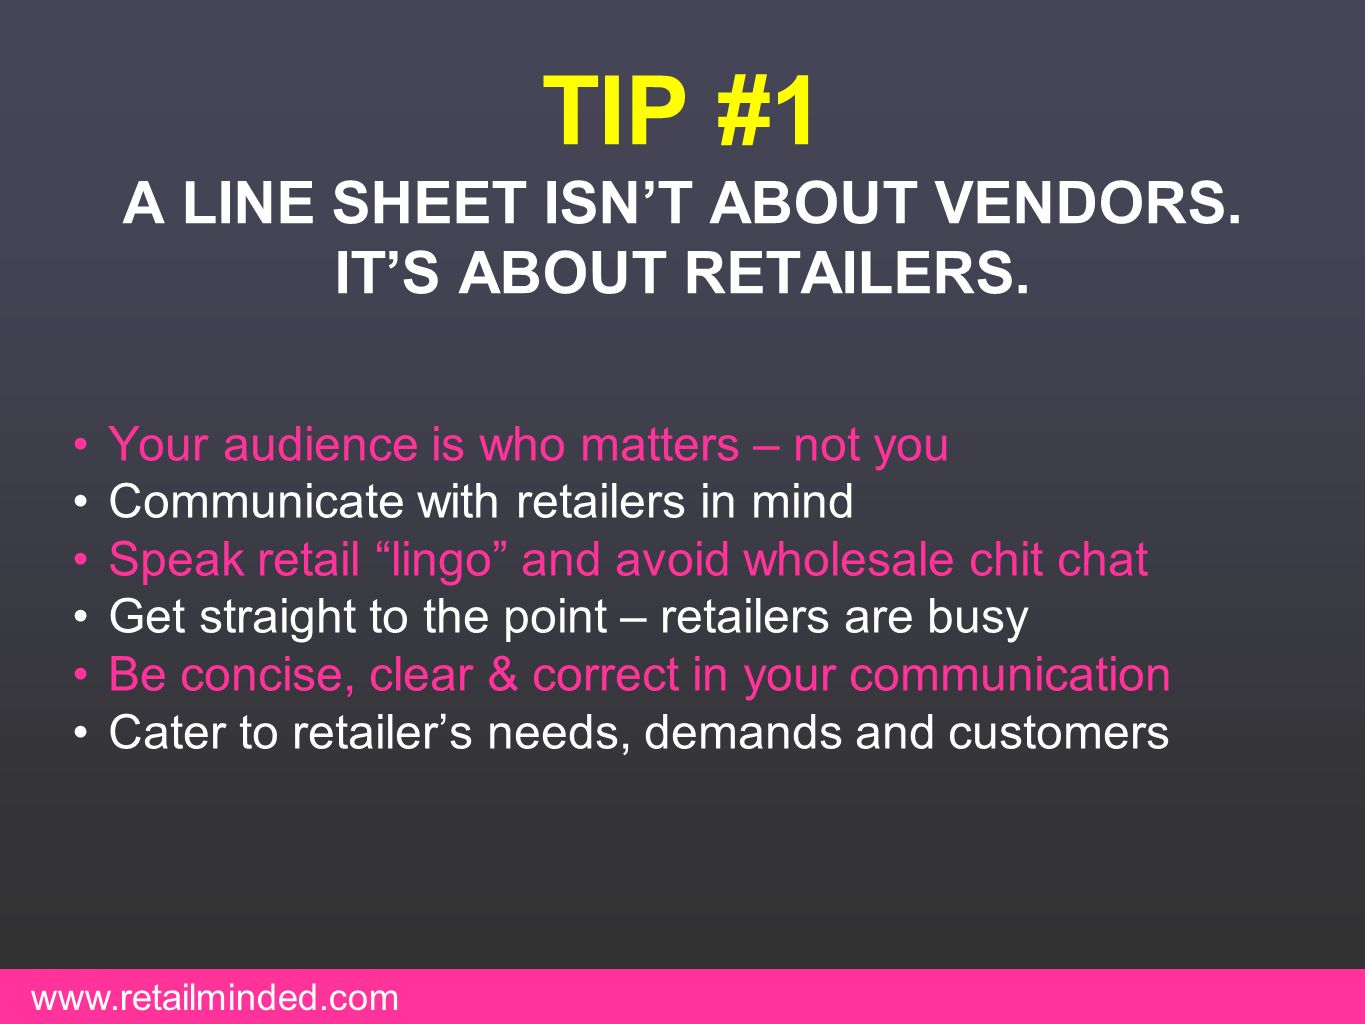 TIP #1 A LINE SHEET ISN’T ABOUT VENDORS. IT’S ABOUT RETAILERS.